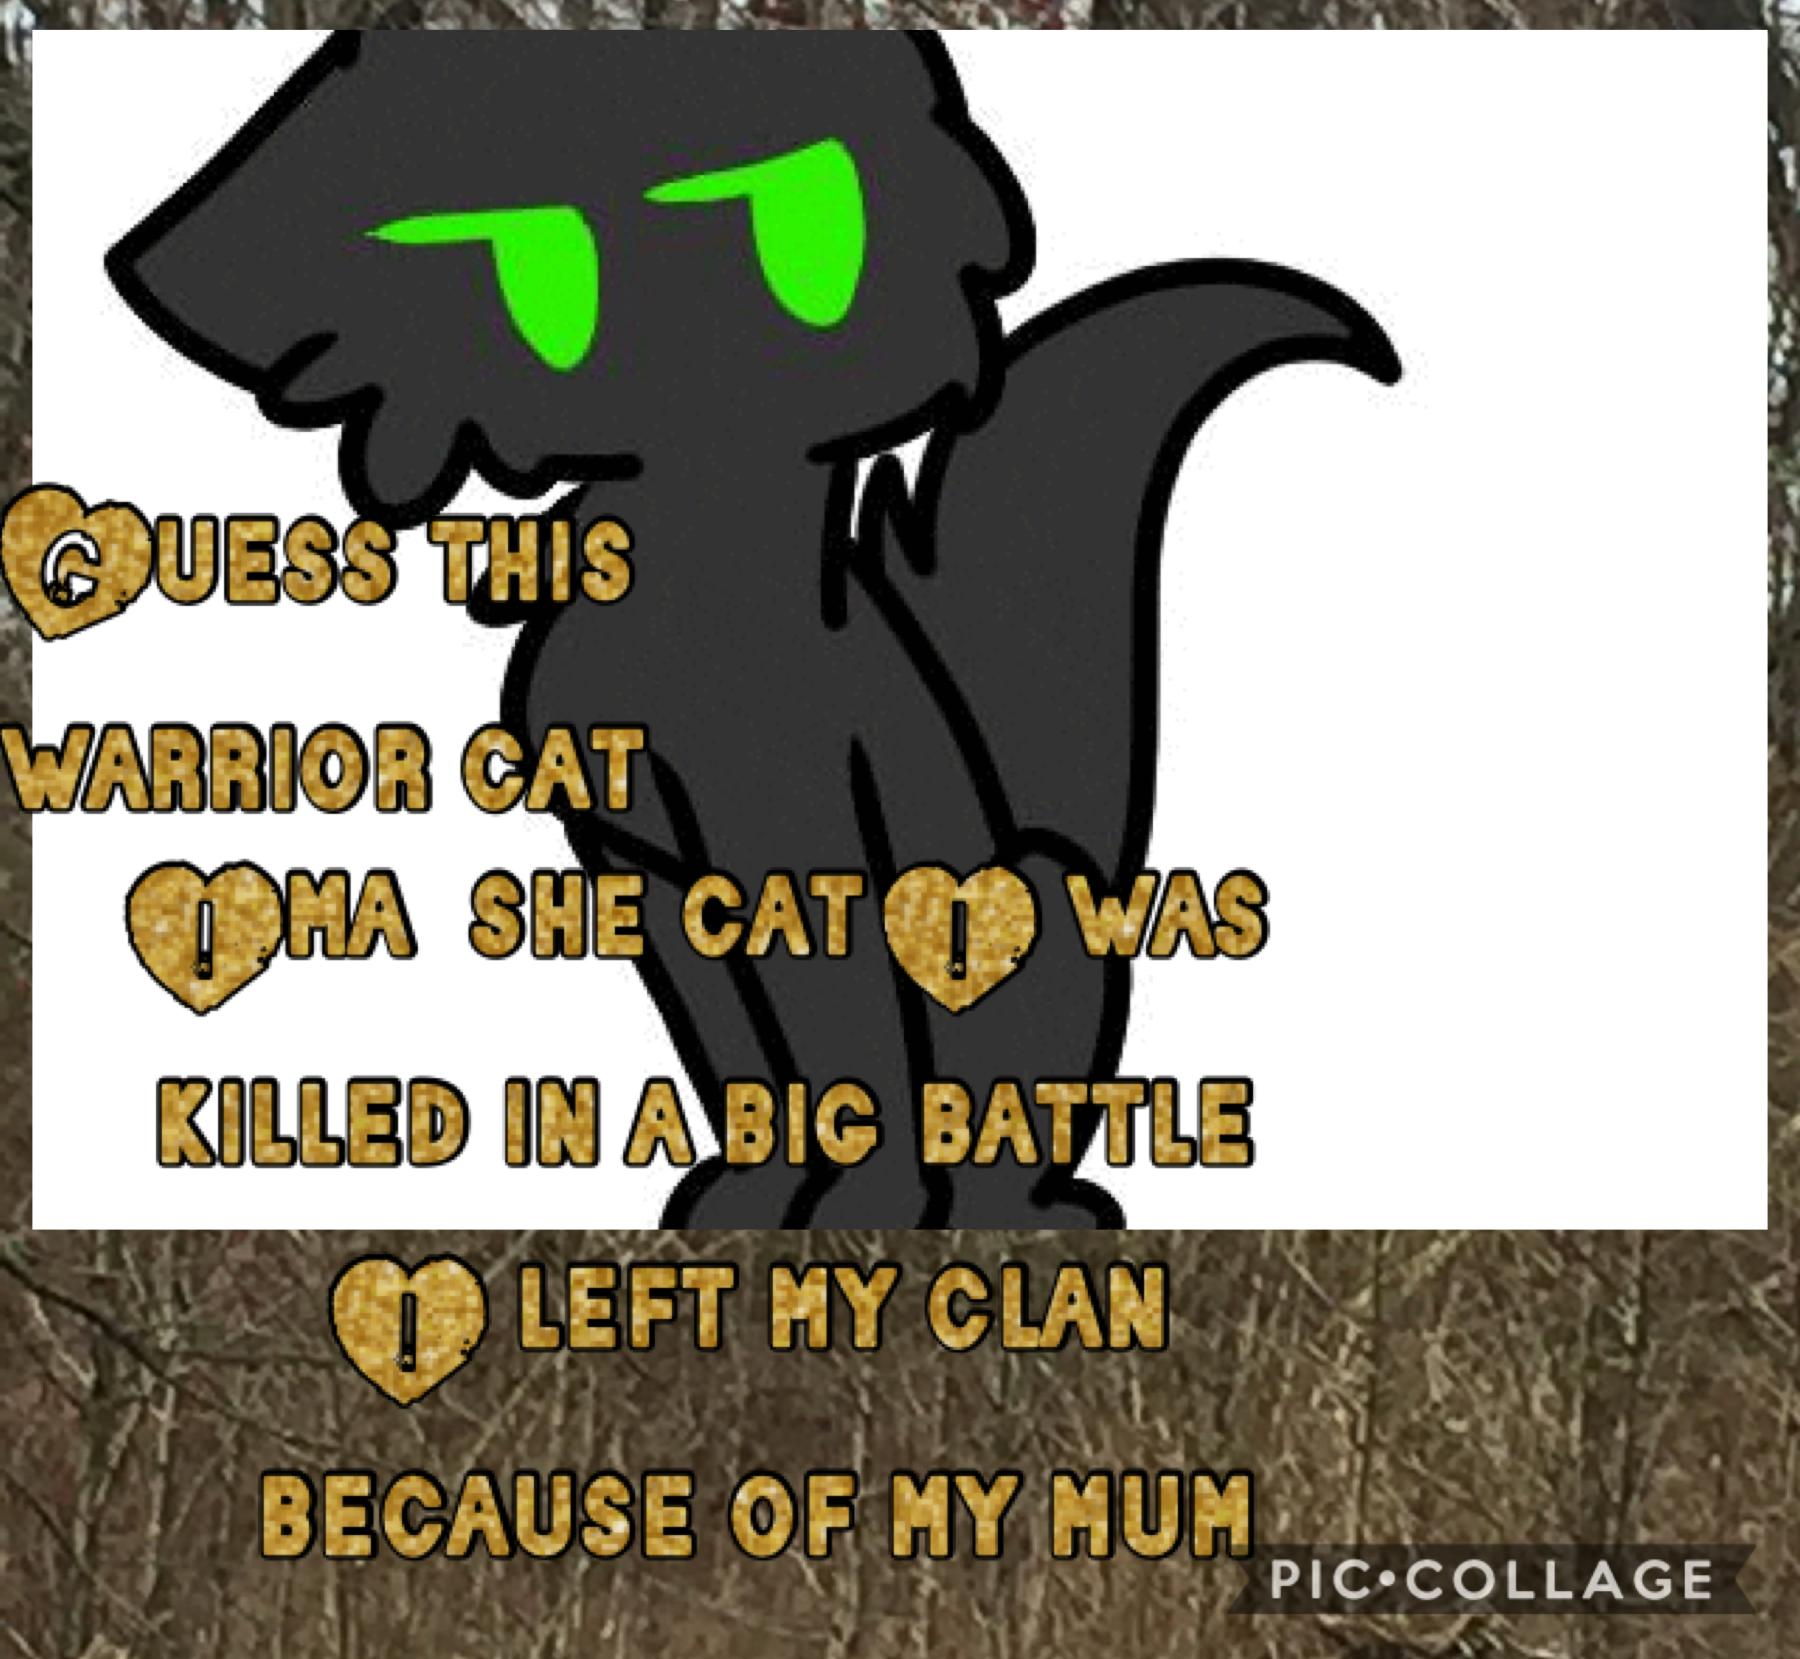 Guess this warrior cat!